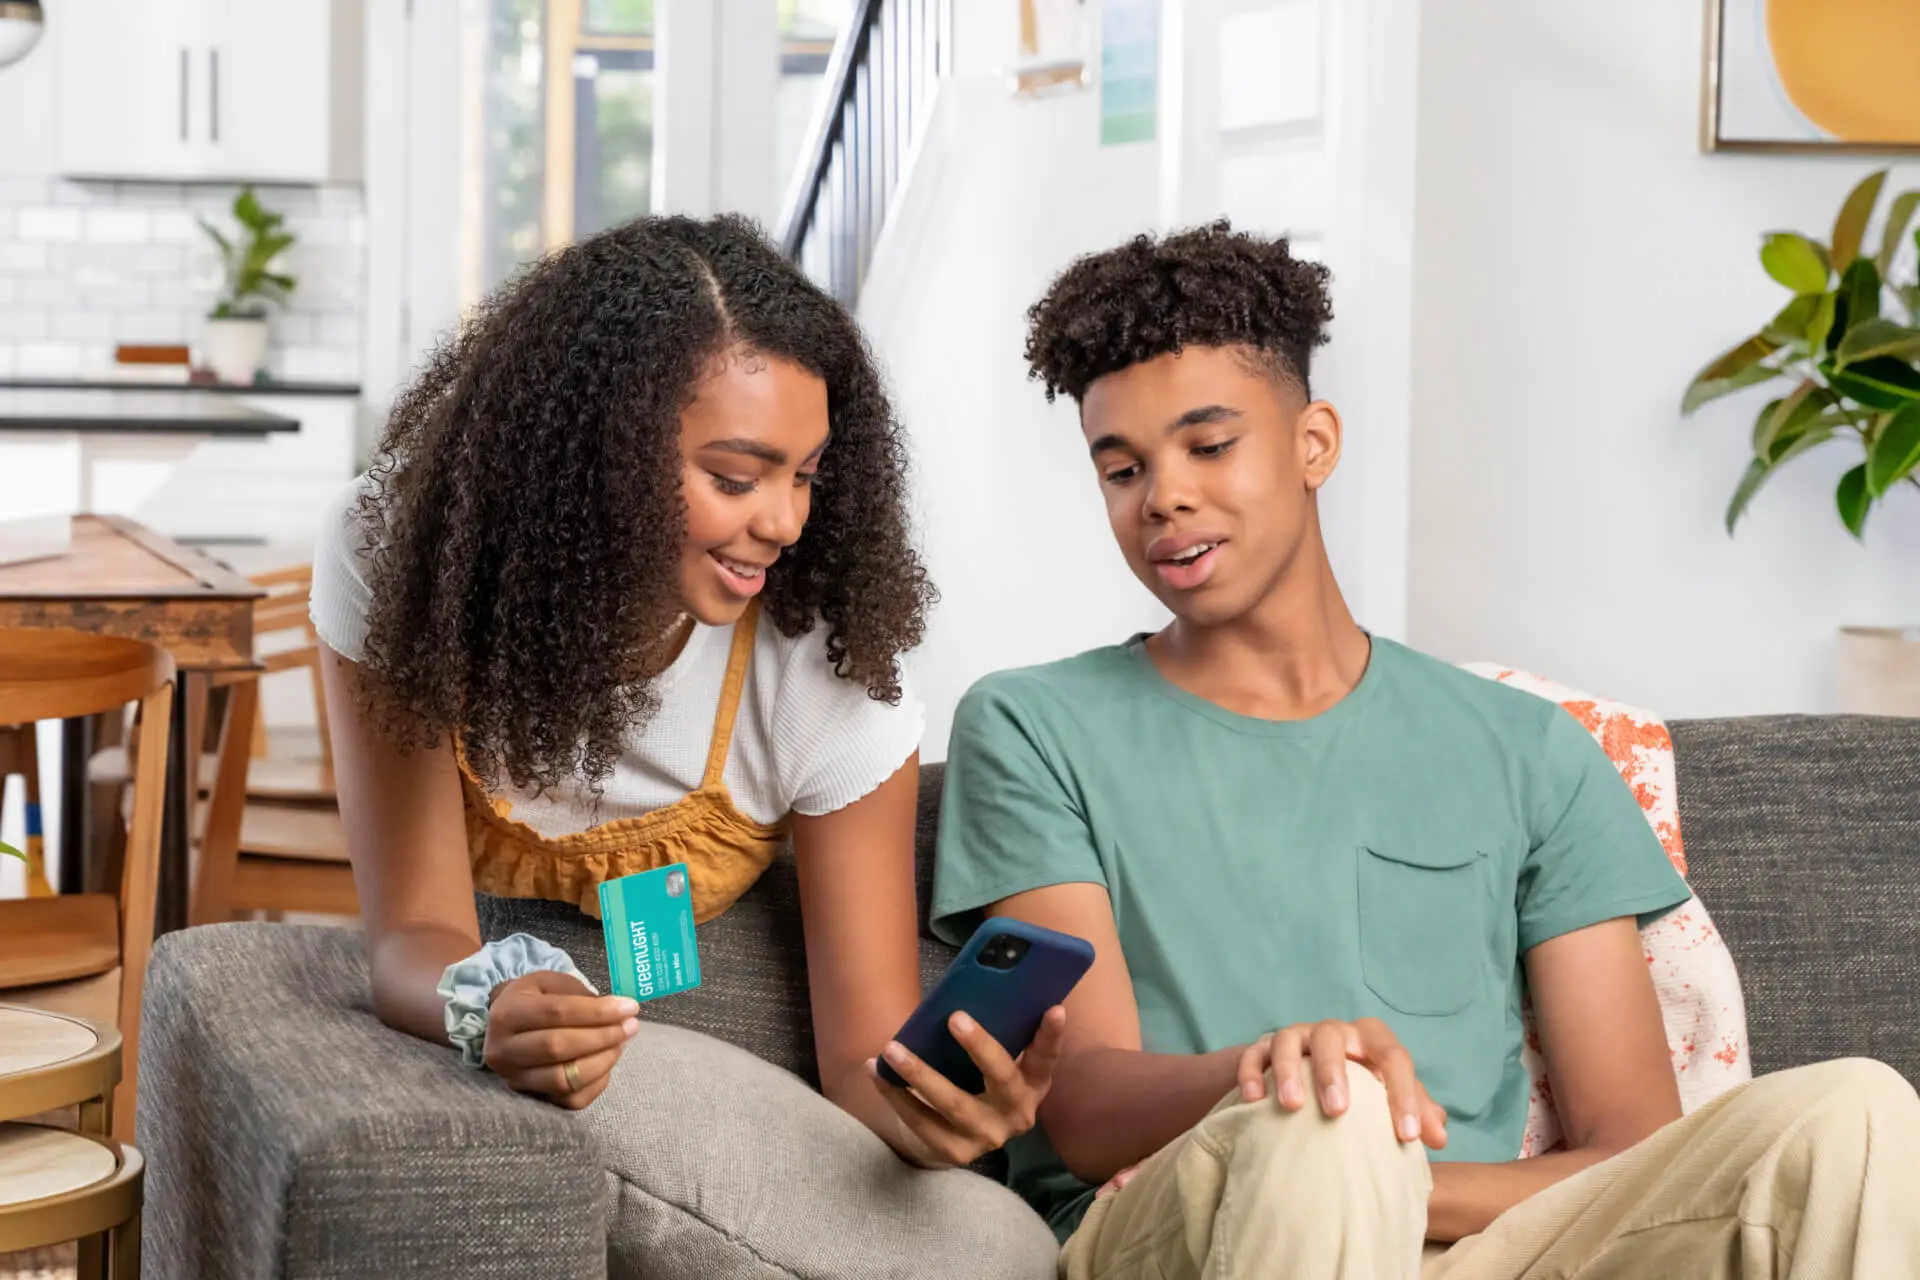 Teen boy and teen girl in living room looking at the Greenlight money app with financial literacy